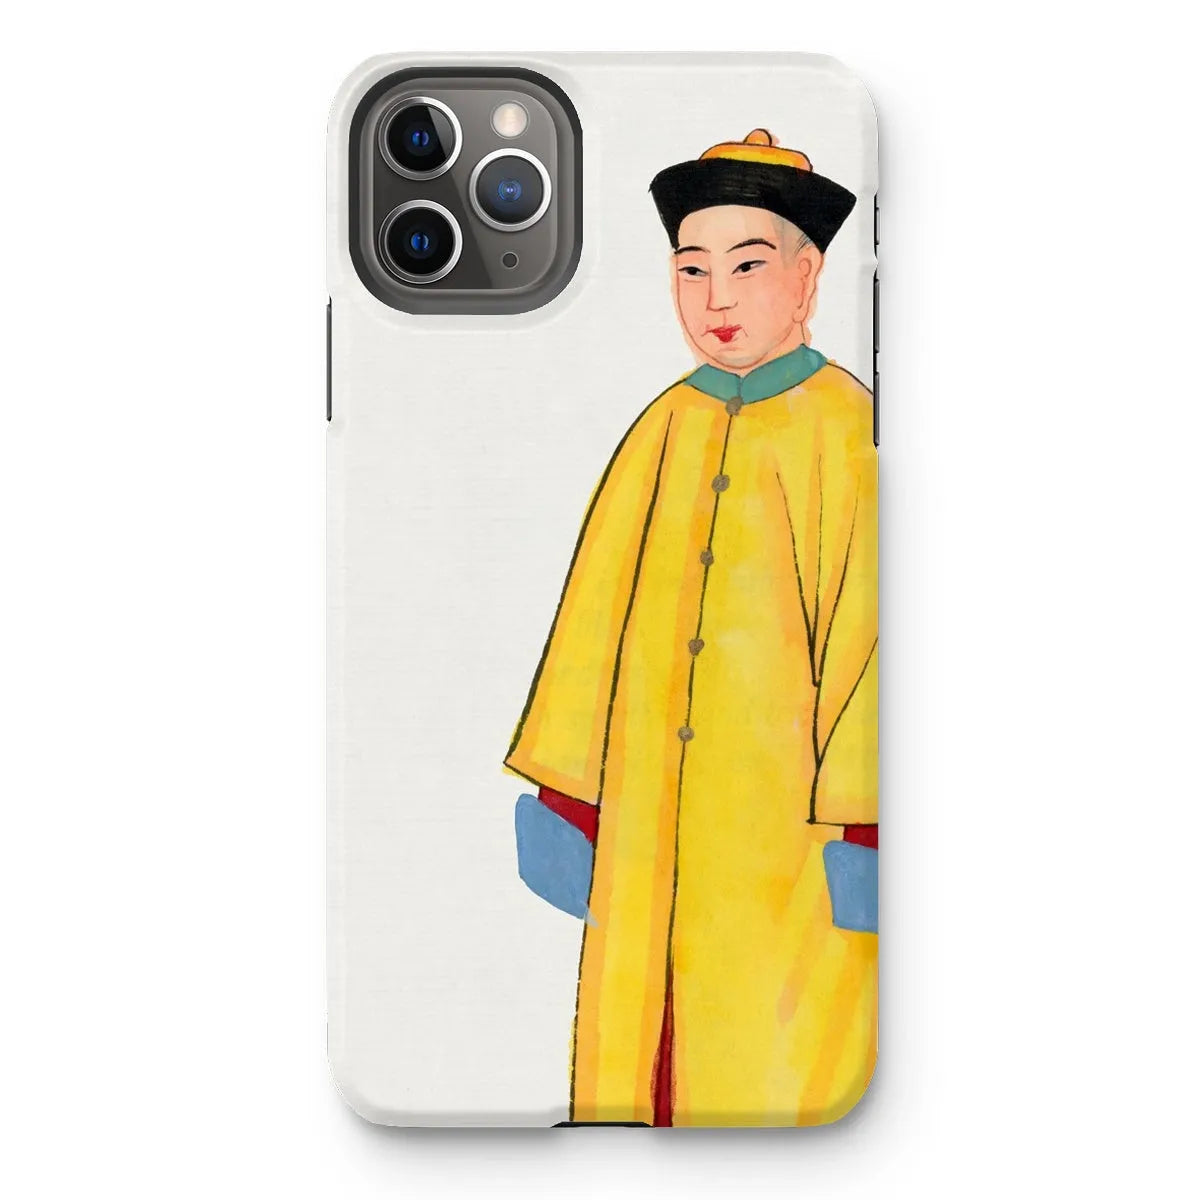 Priest In Yellow Robes - Chinese Aesthetic Art Phone Case - Iphone 11 Pro Max / Matte - Mobile Phone Cases - Aesthetic